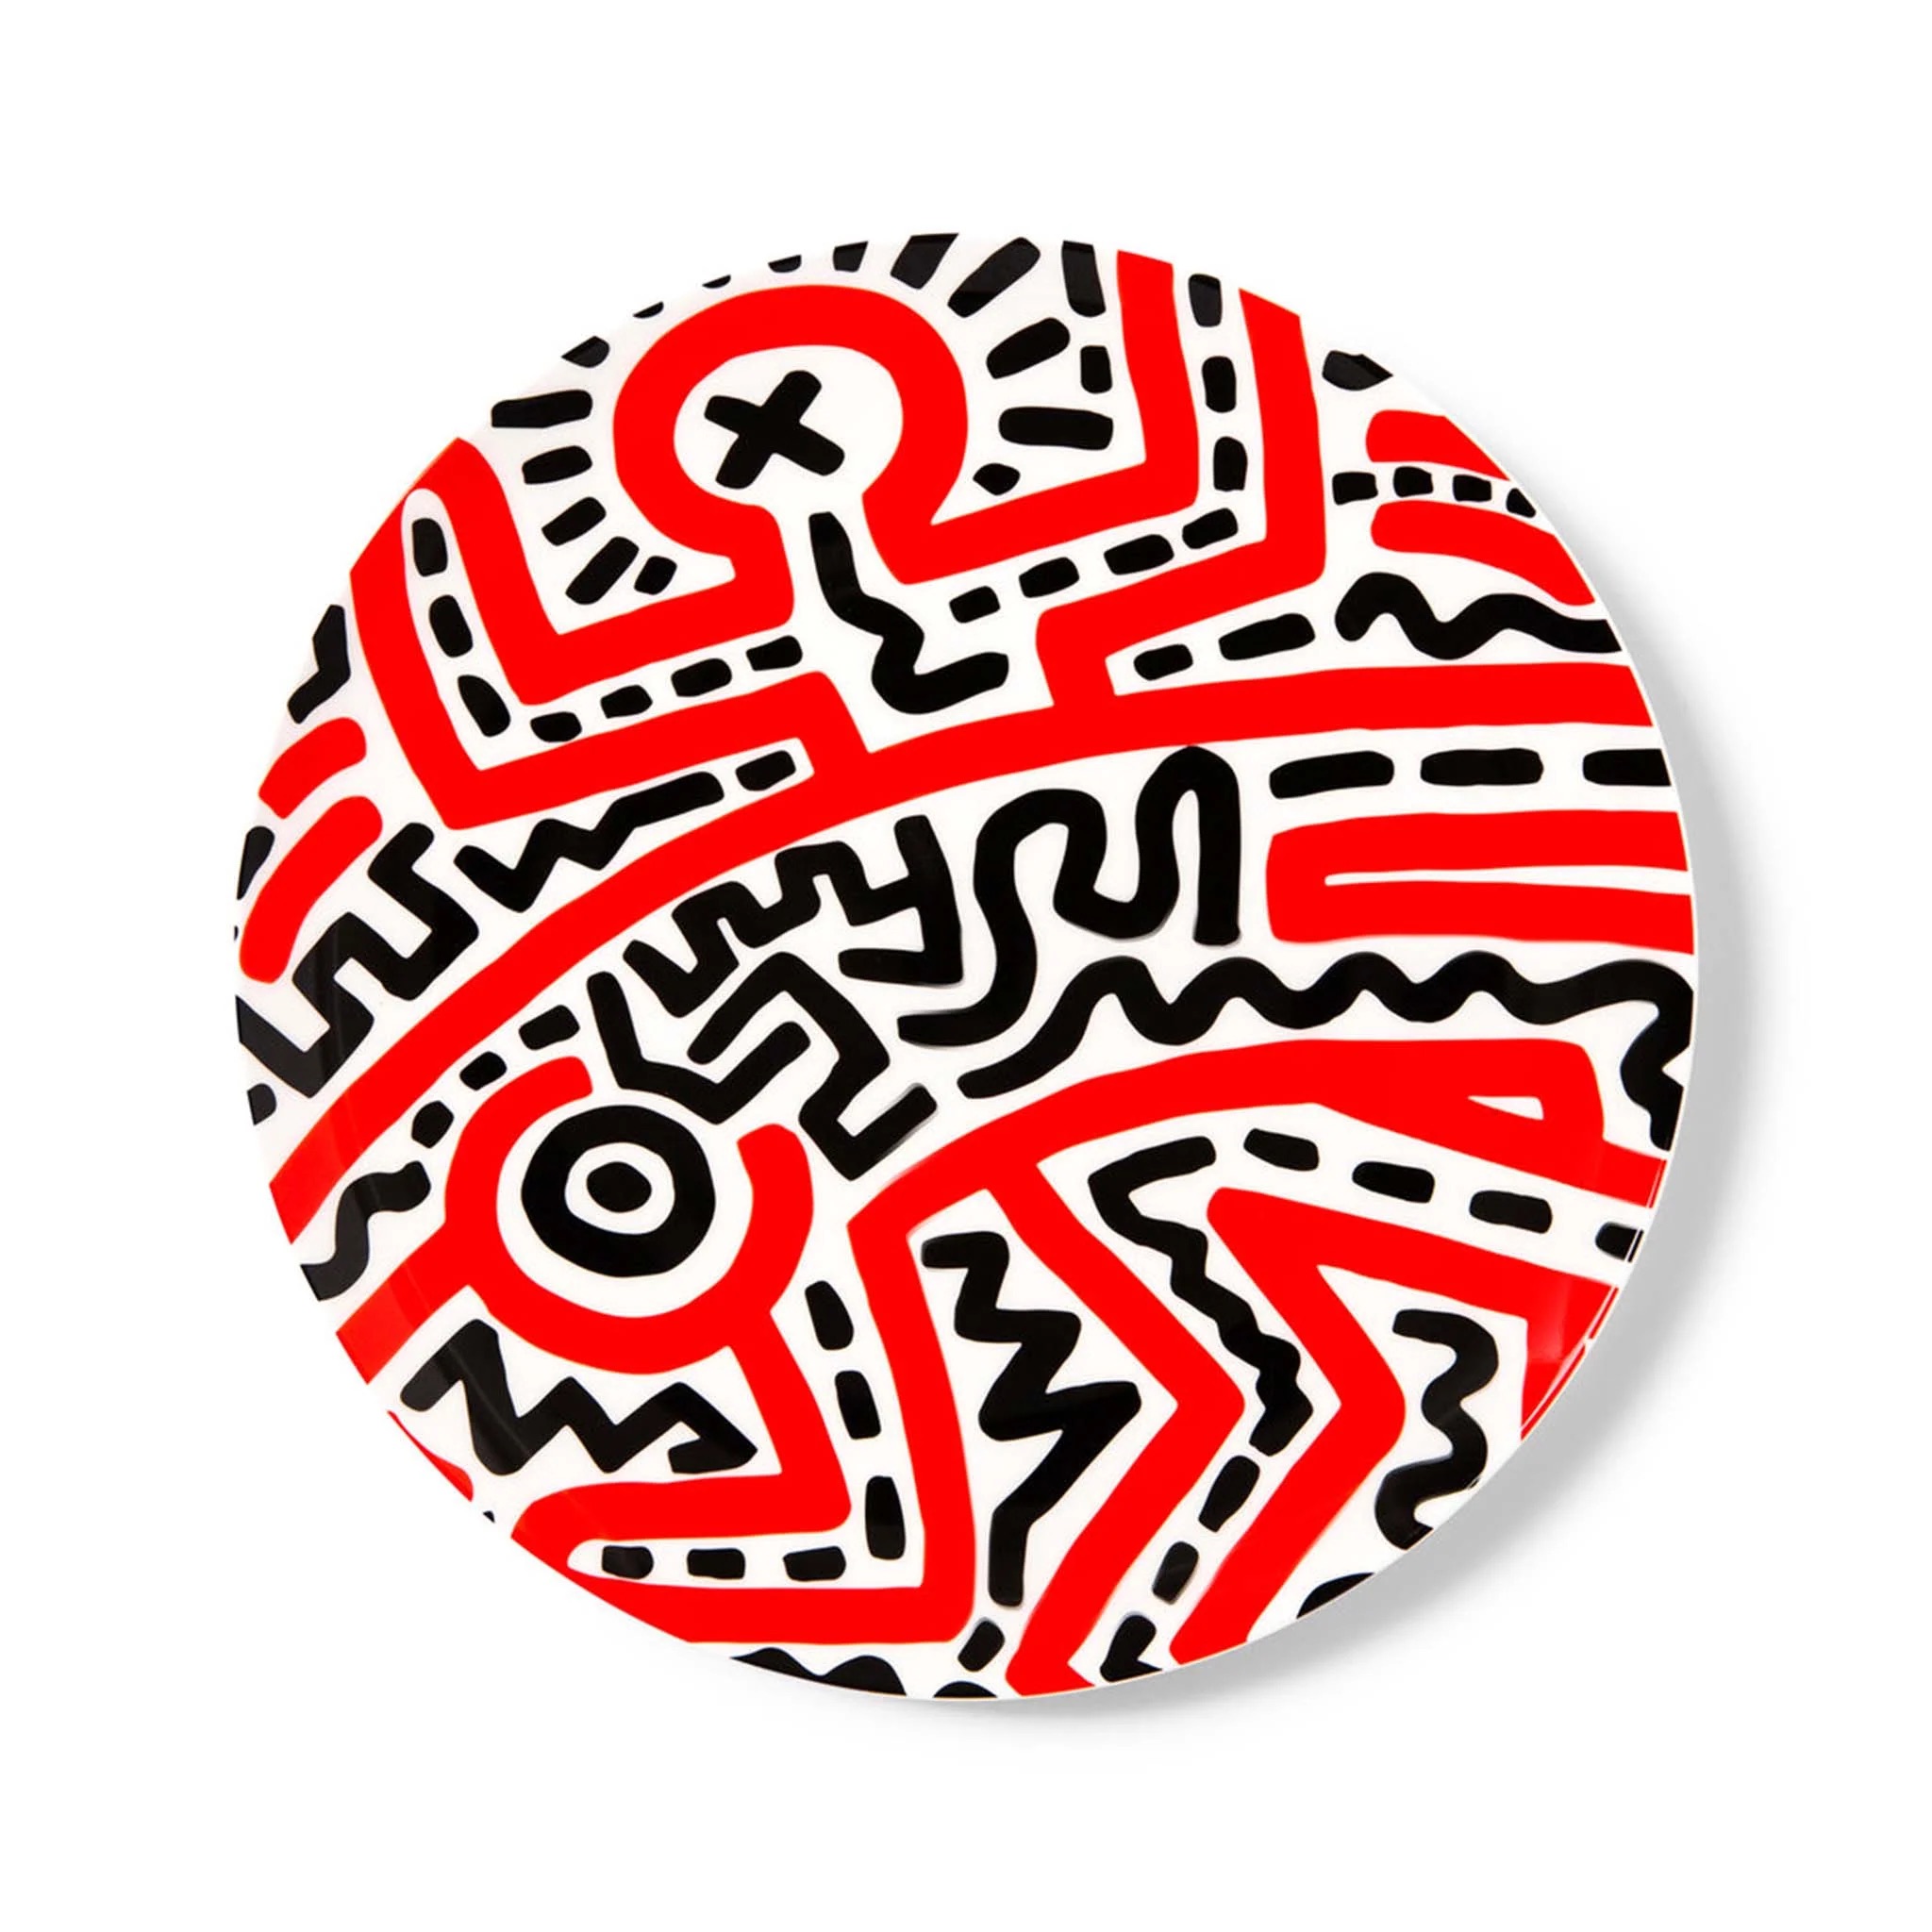 Keith Haring "Untitled" Plate